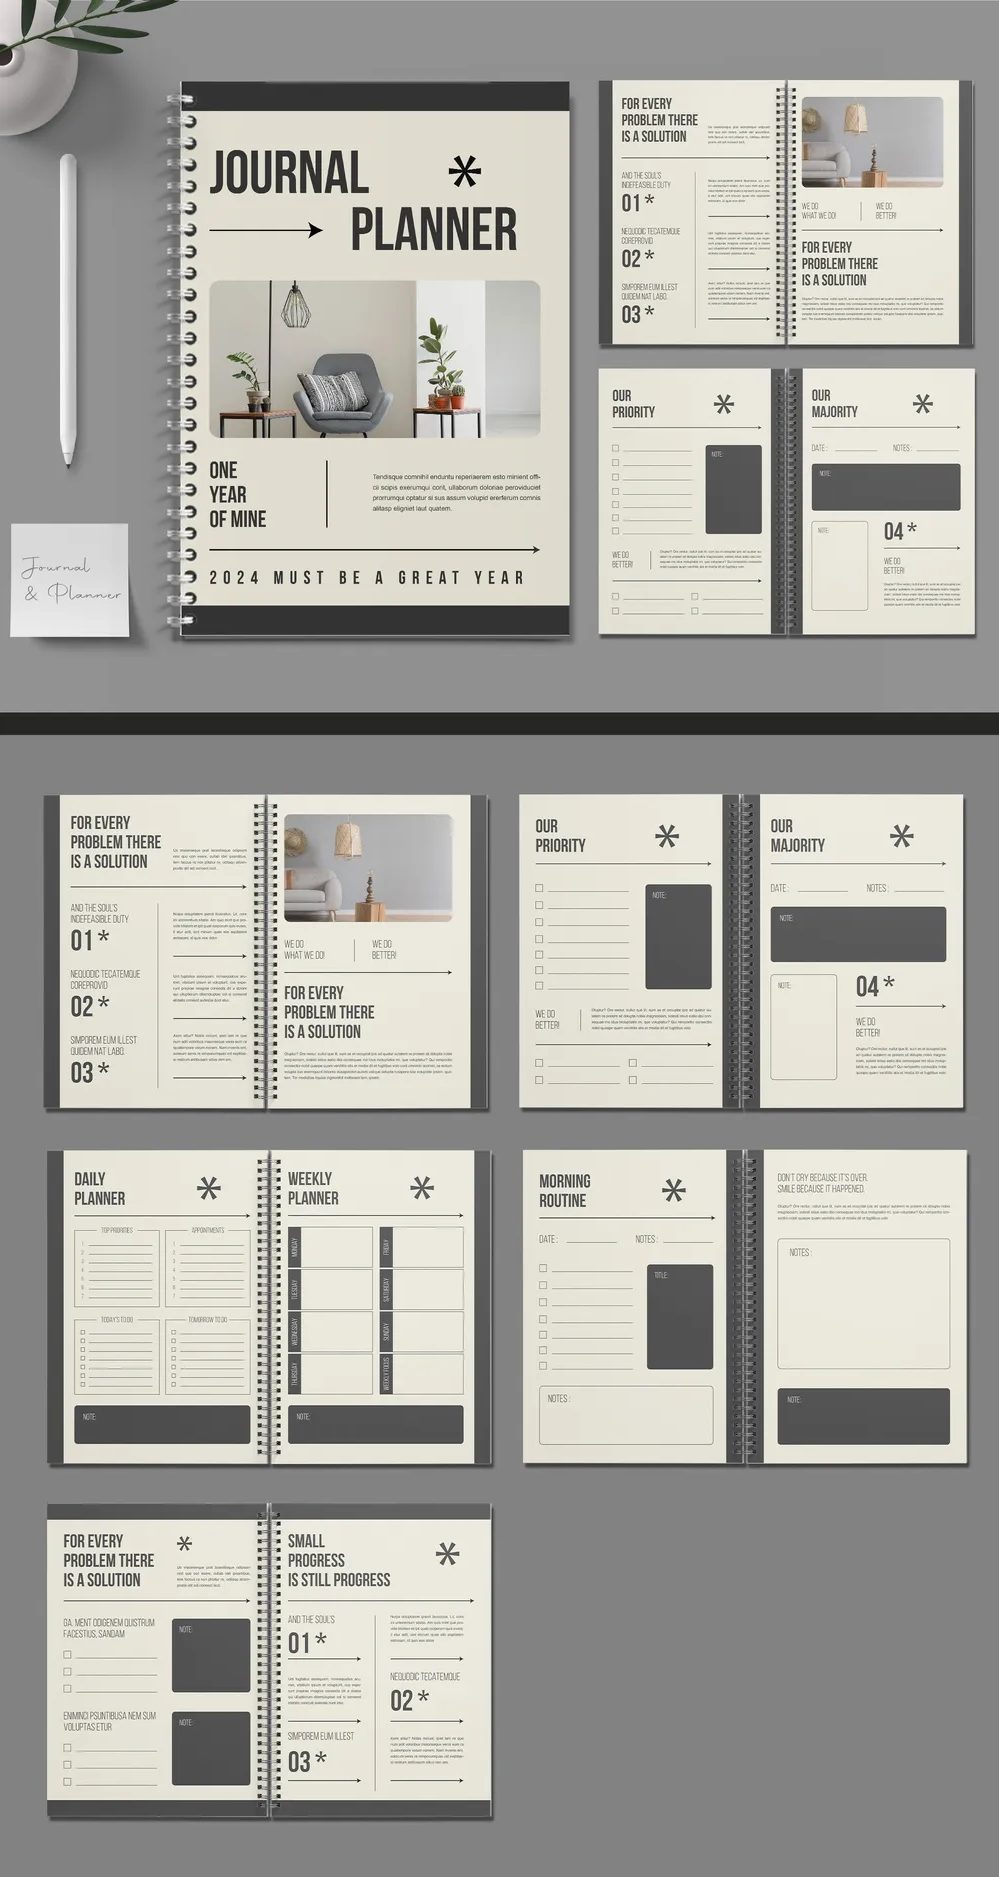 Adobestock - Journal And Planner Template 728990327